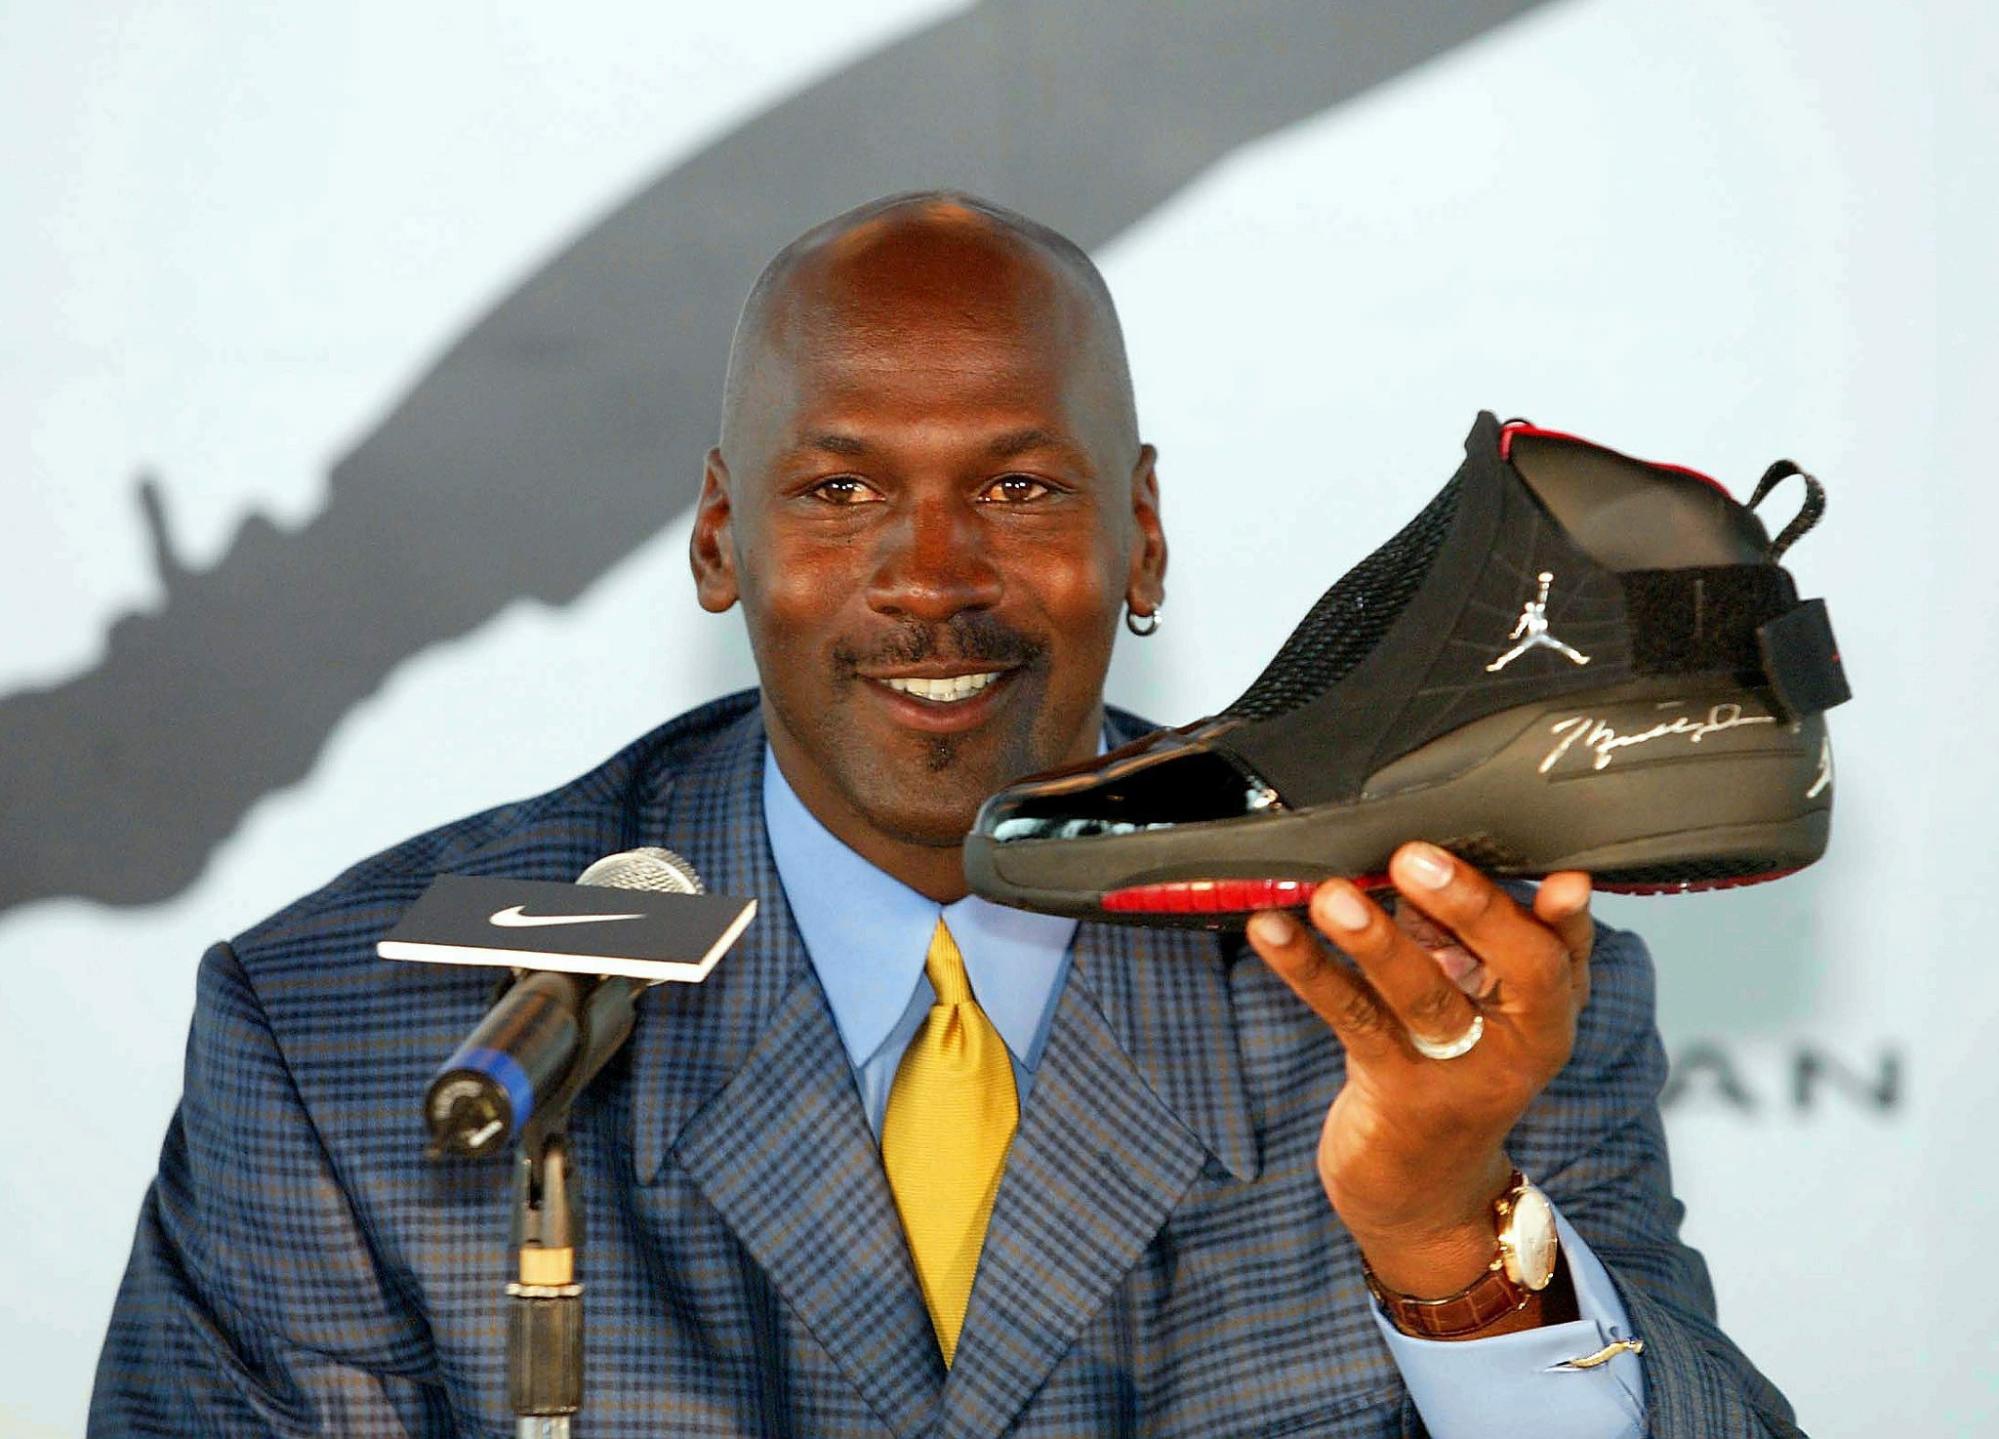 The 'holy grail' of sneakers: Michael Jordan's NBA Finals trainers are for  sale – 6 pairs of Air Jordan shoes from the elite 'Dynasty Collection' are  expected to sell for millions at